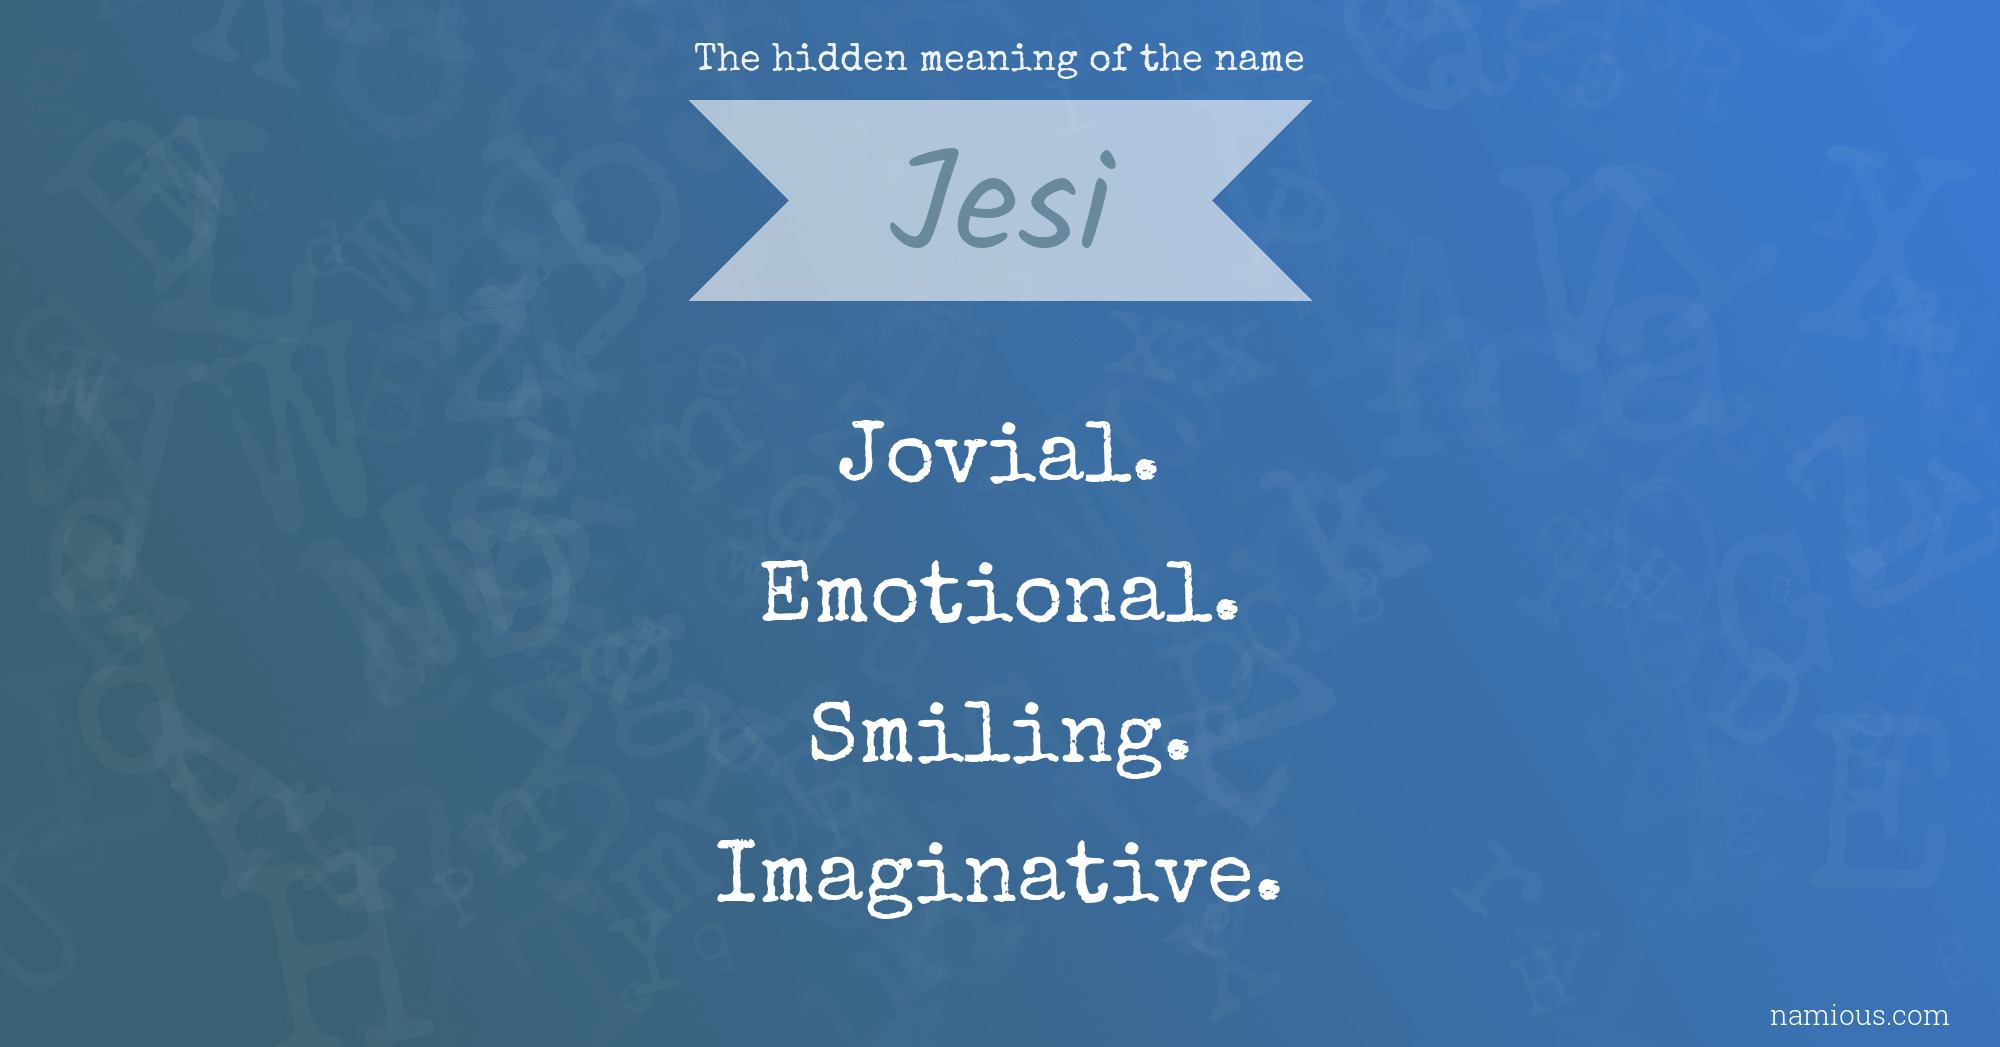 The hidden meaning of the name Jesi